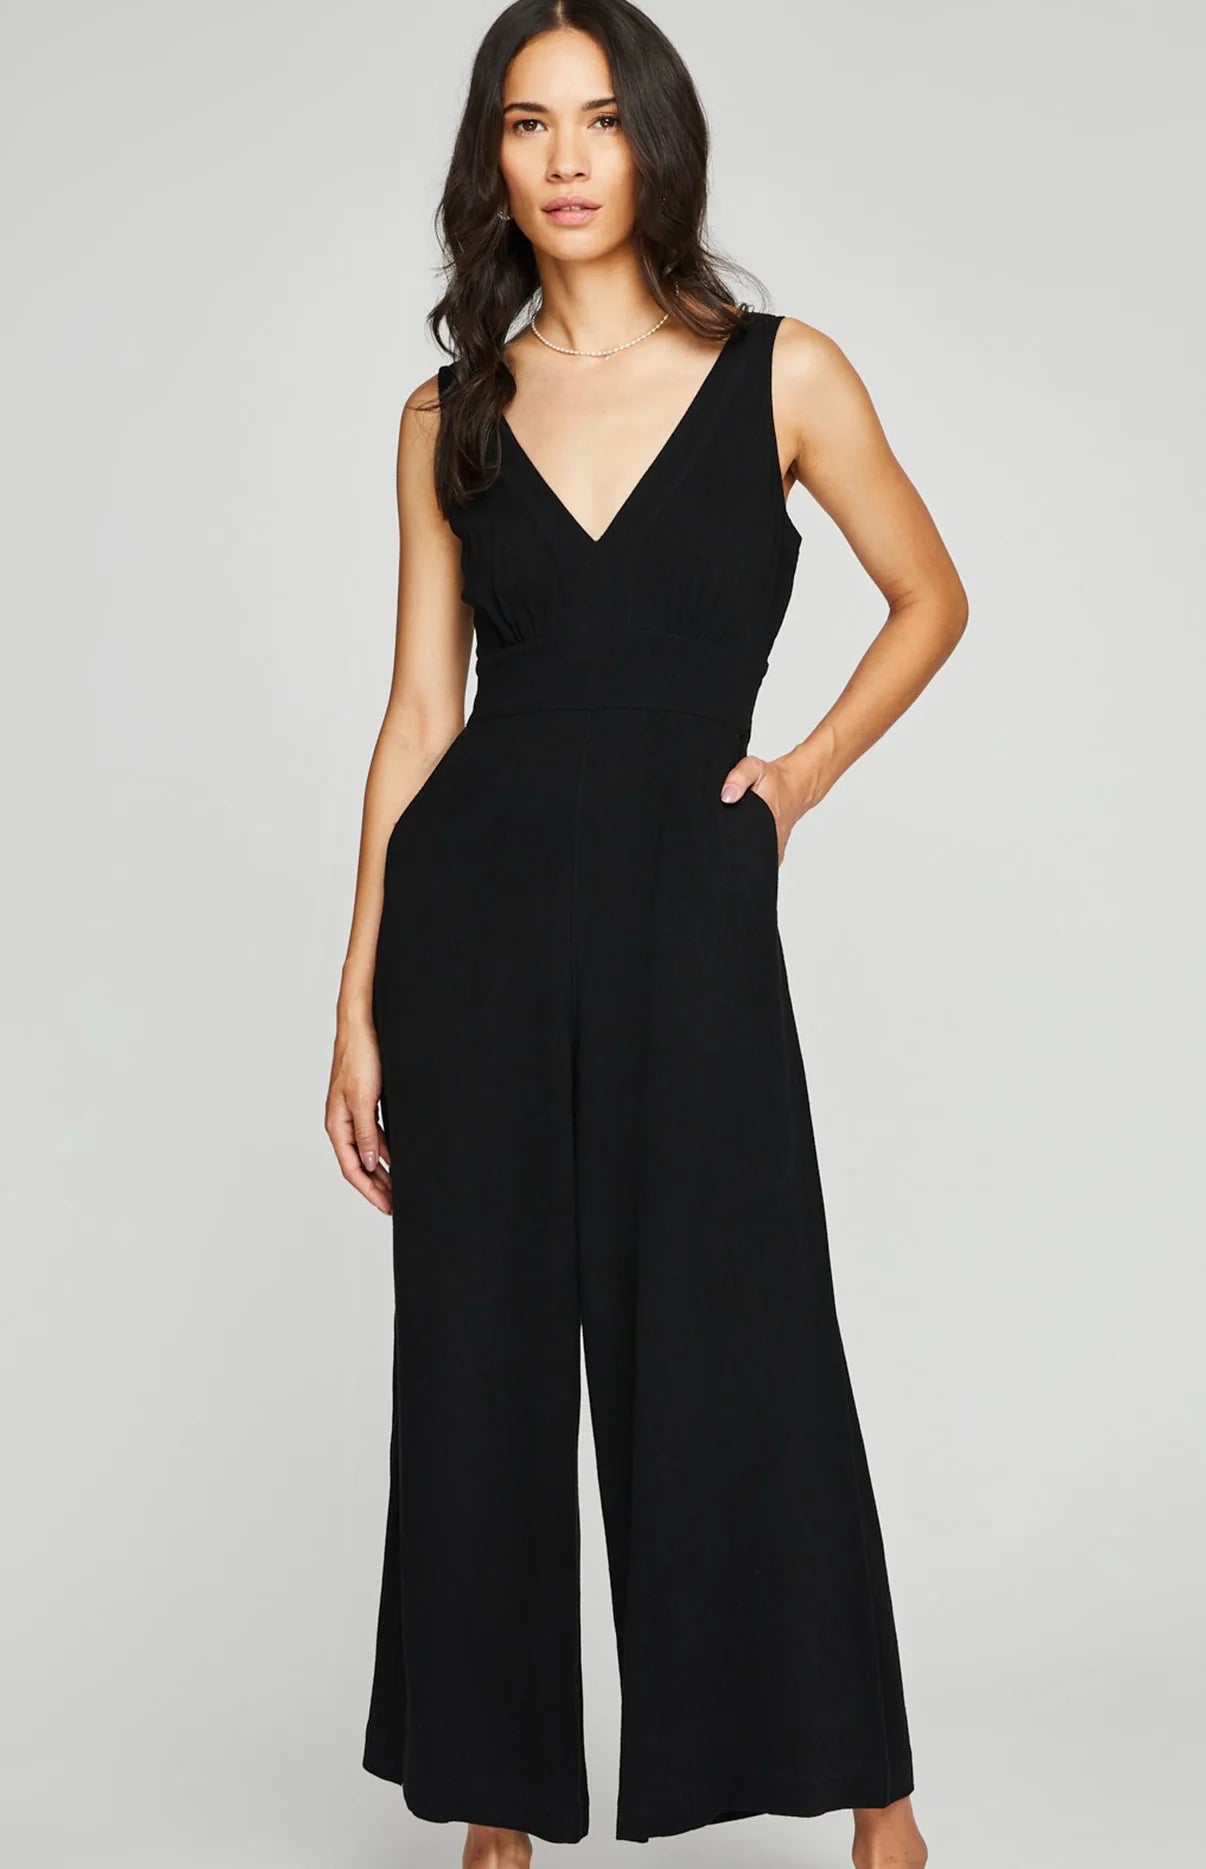 The Black Gianna Jumpsuit by Gentle Fawn